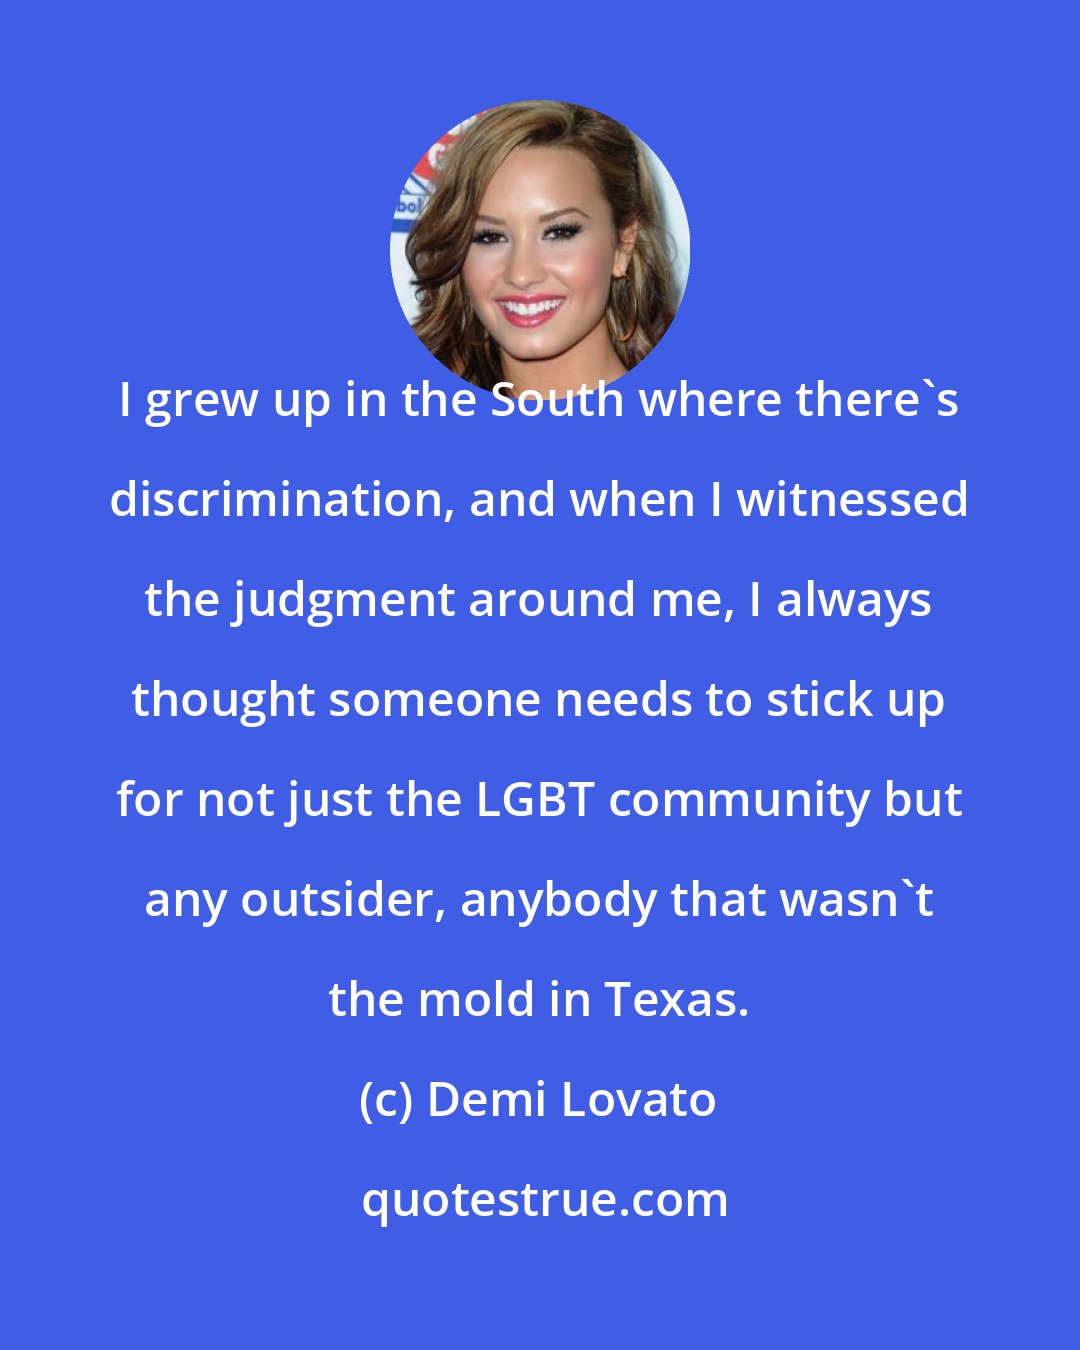 Demi Lovato: I grew up in the South where there's discrimination, and when I witnessed the judgment around me, I always thought someone needs to stick up for not just the LGBT community but any outsider, anybody that wasn't the mold in Texas.